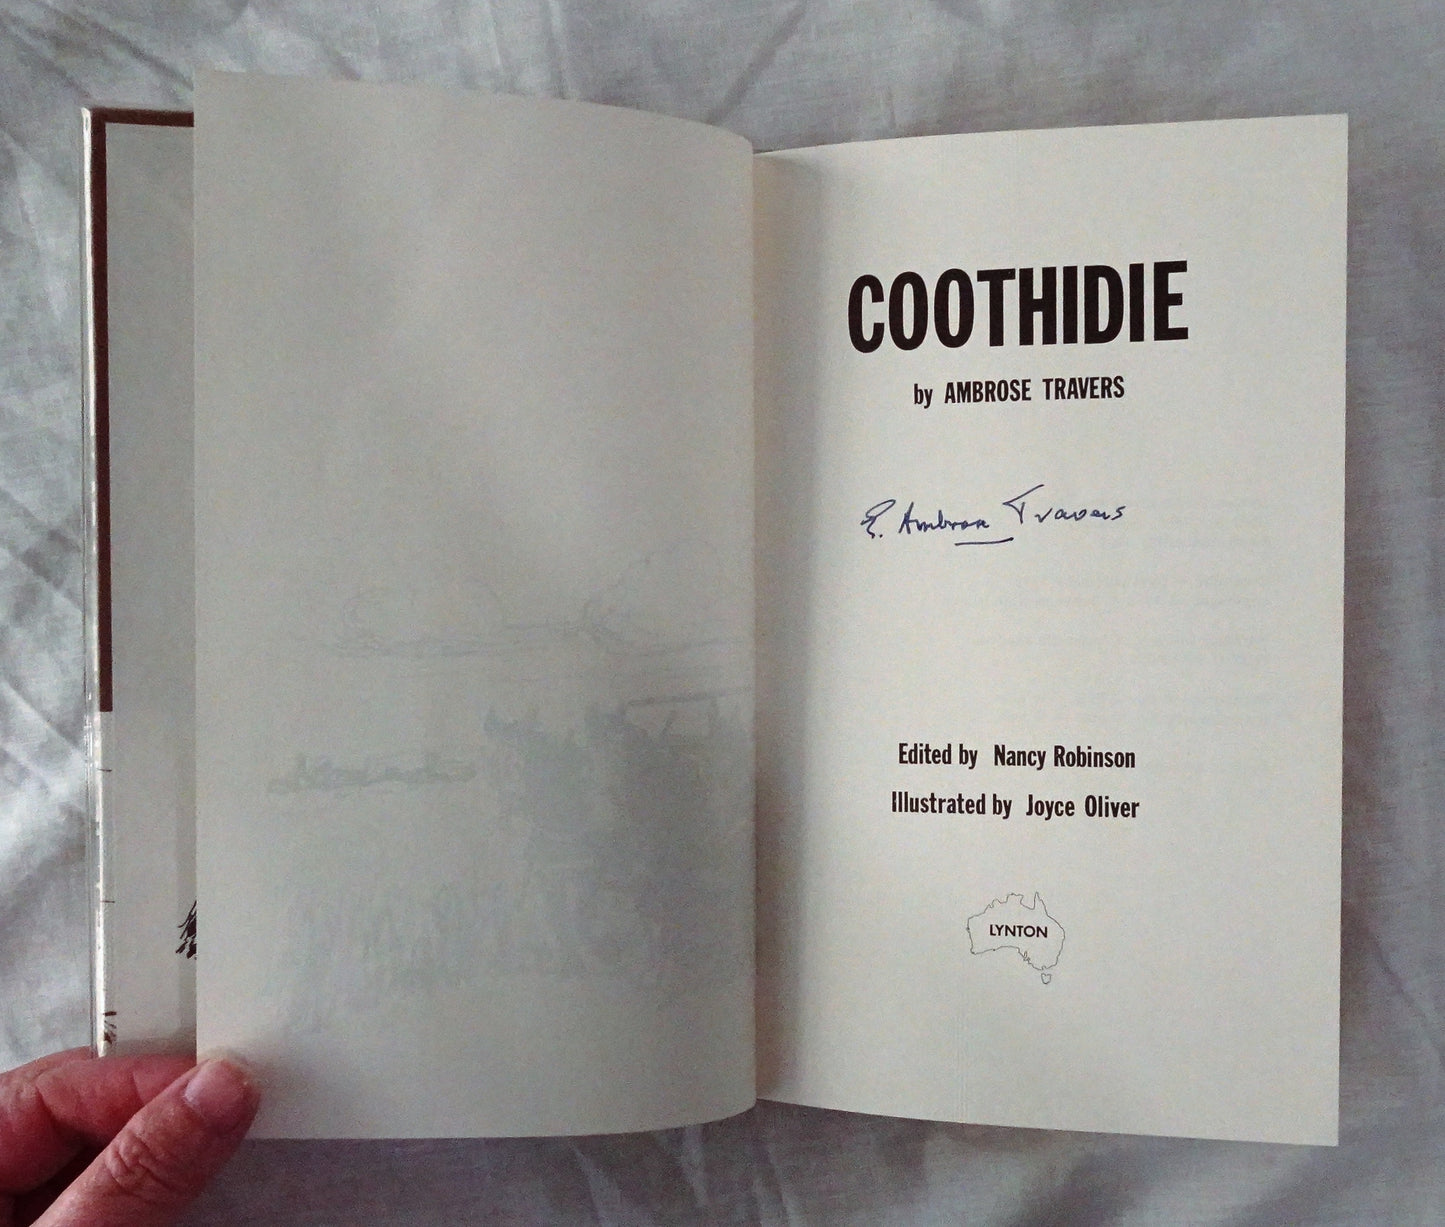 Coothidie by Ambrose Travers